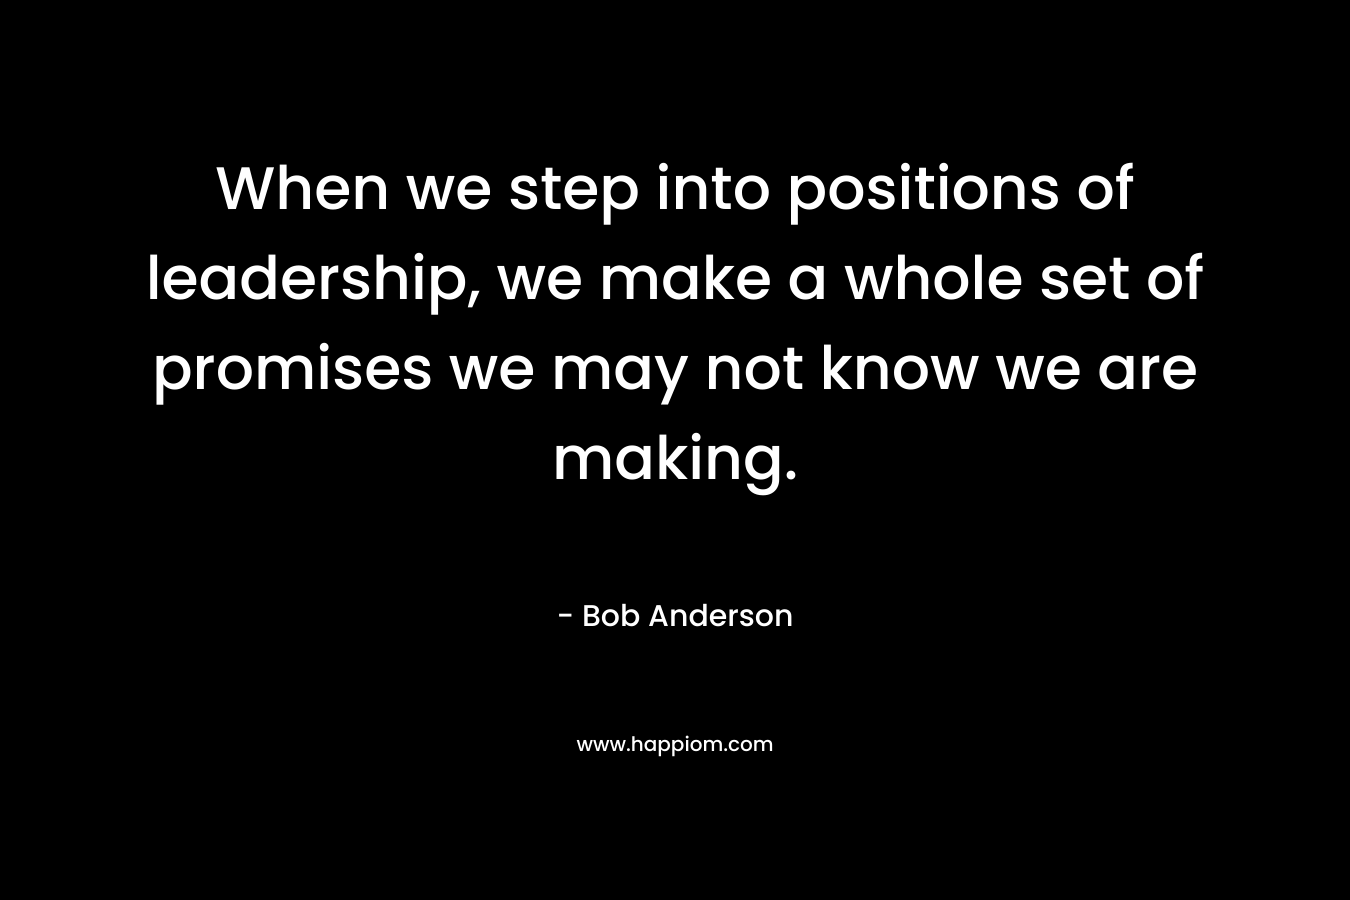 When we step into positions of leadership, we make a whole set of promises we may not know we are making.